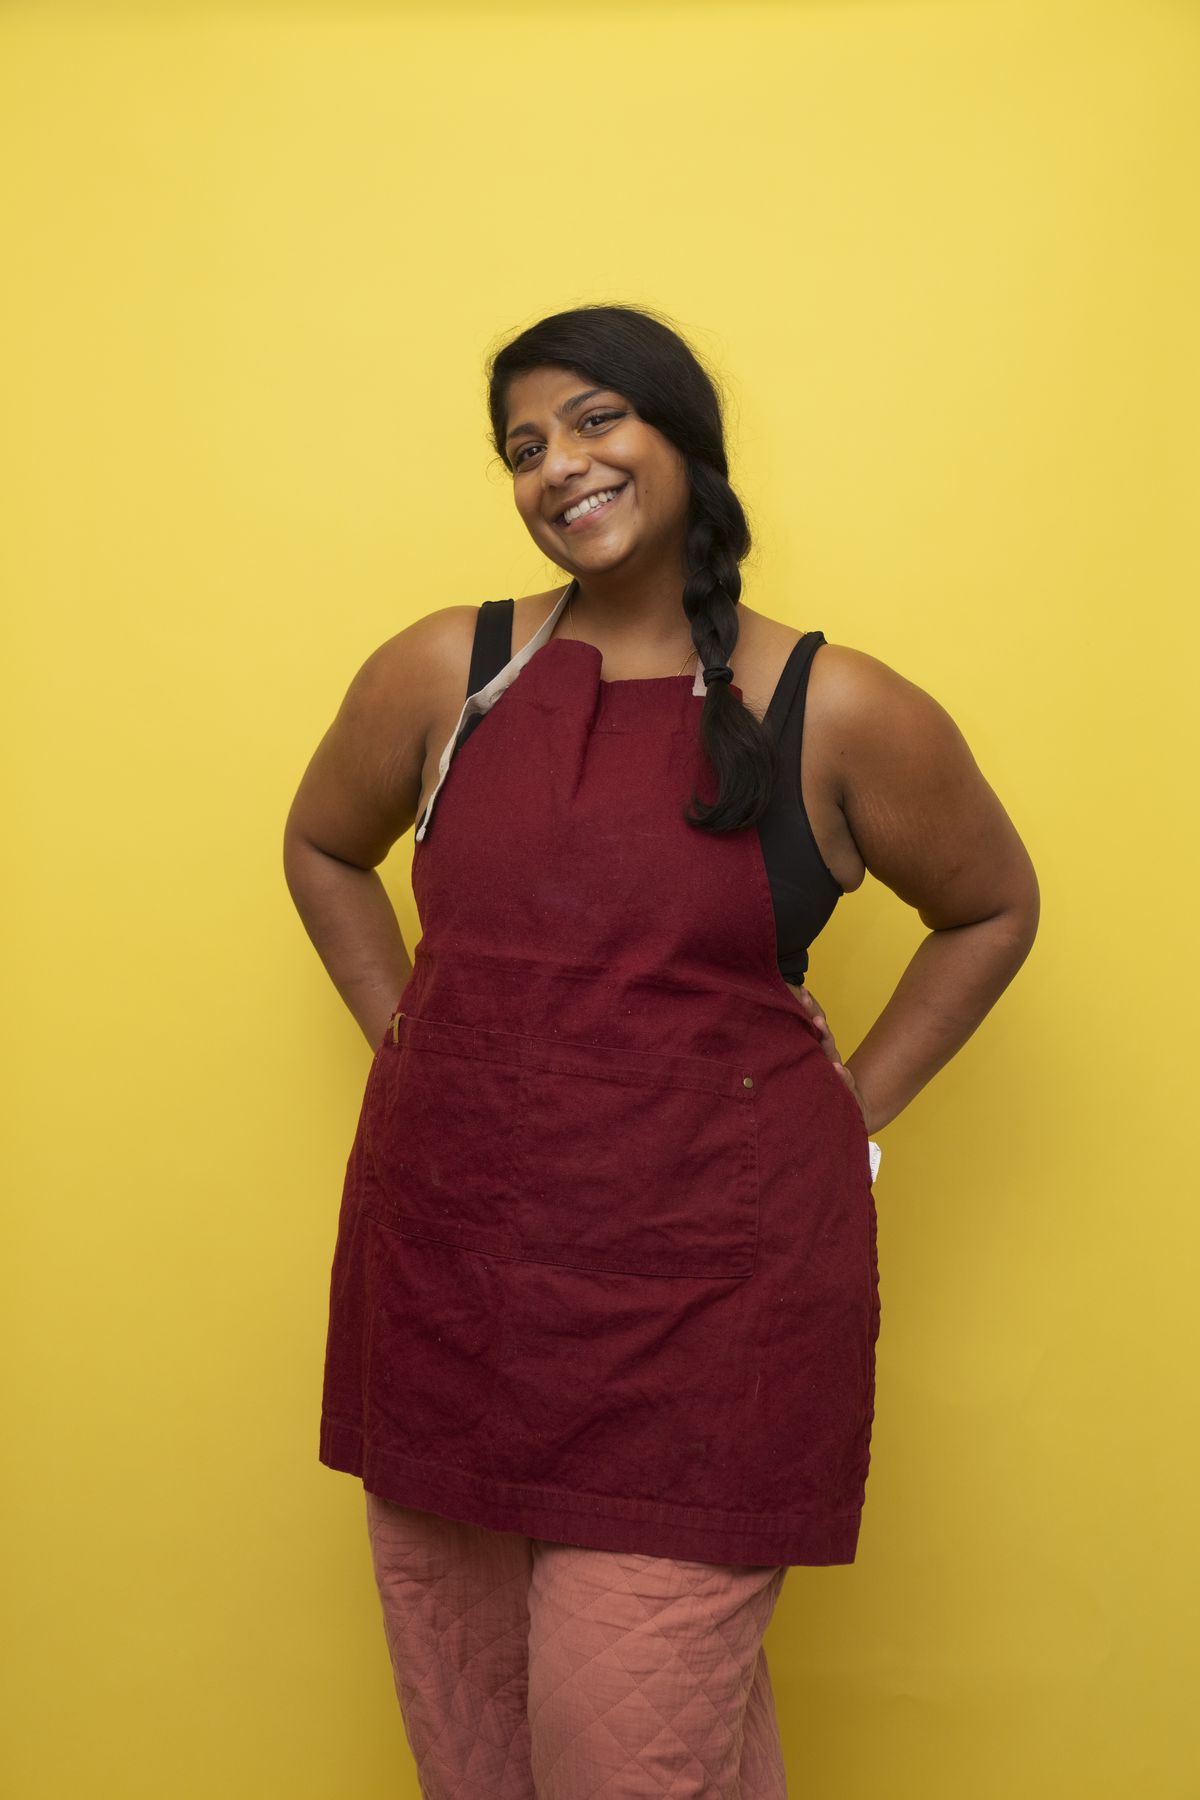 A woman in a red apron in front of a yellow background.